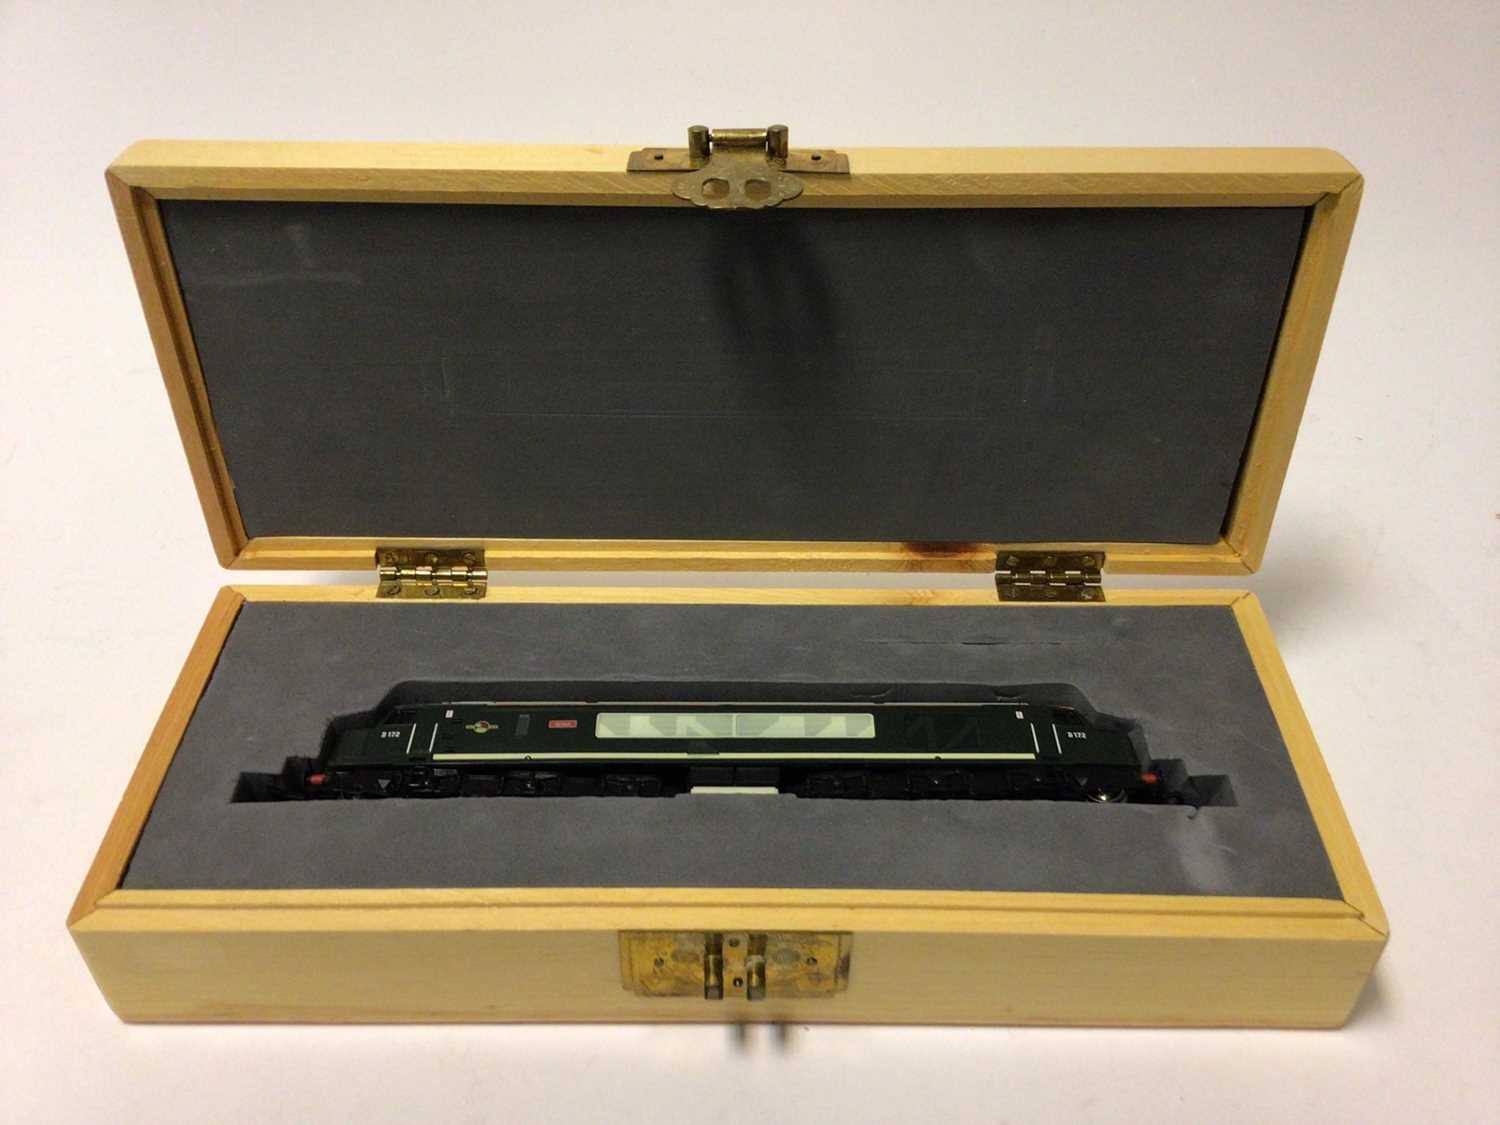 Lot 220 - Bachmann OO gauge limited edition Class 46 "Ixion" D172 locomotive and tender, BR green livery with late crest, in presentation wooden box, 31-080